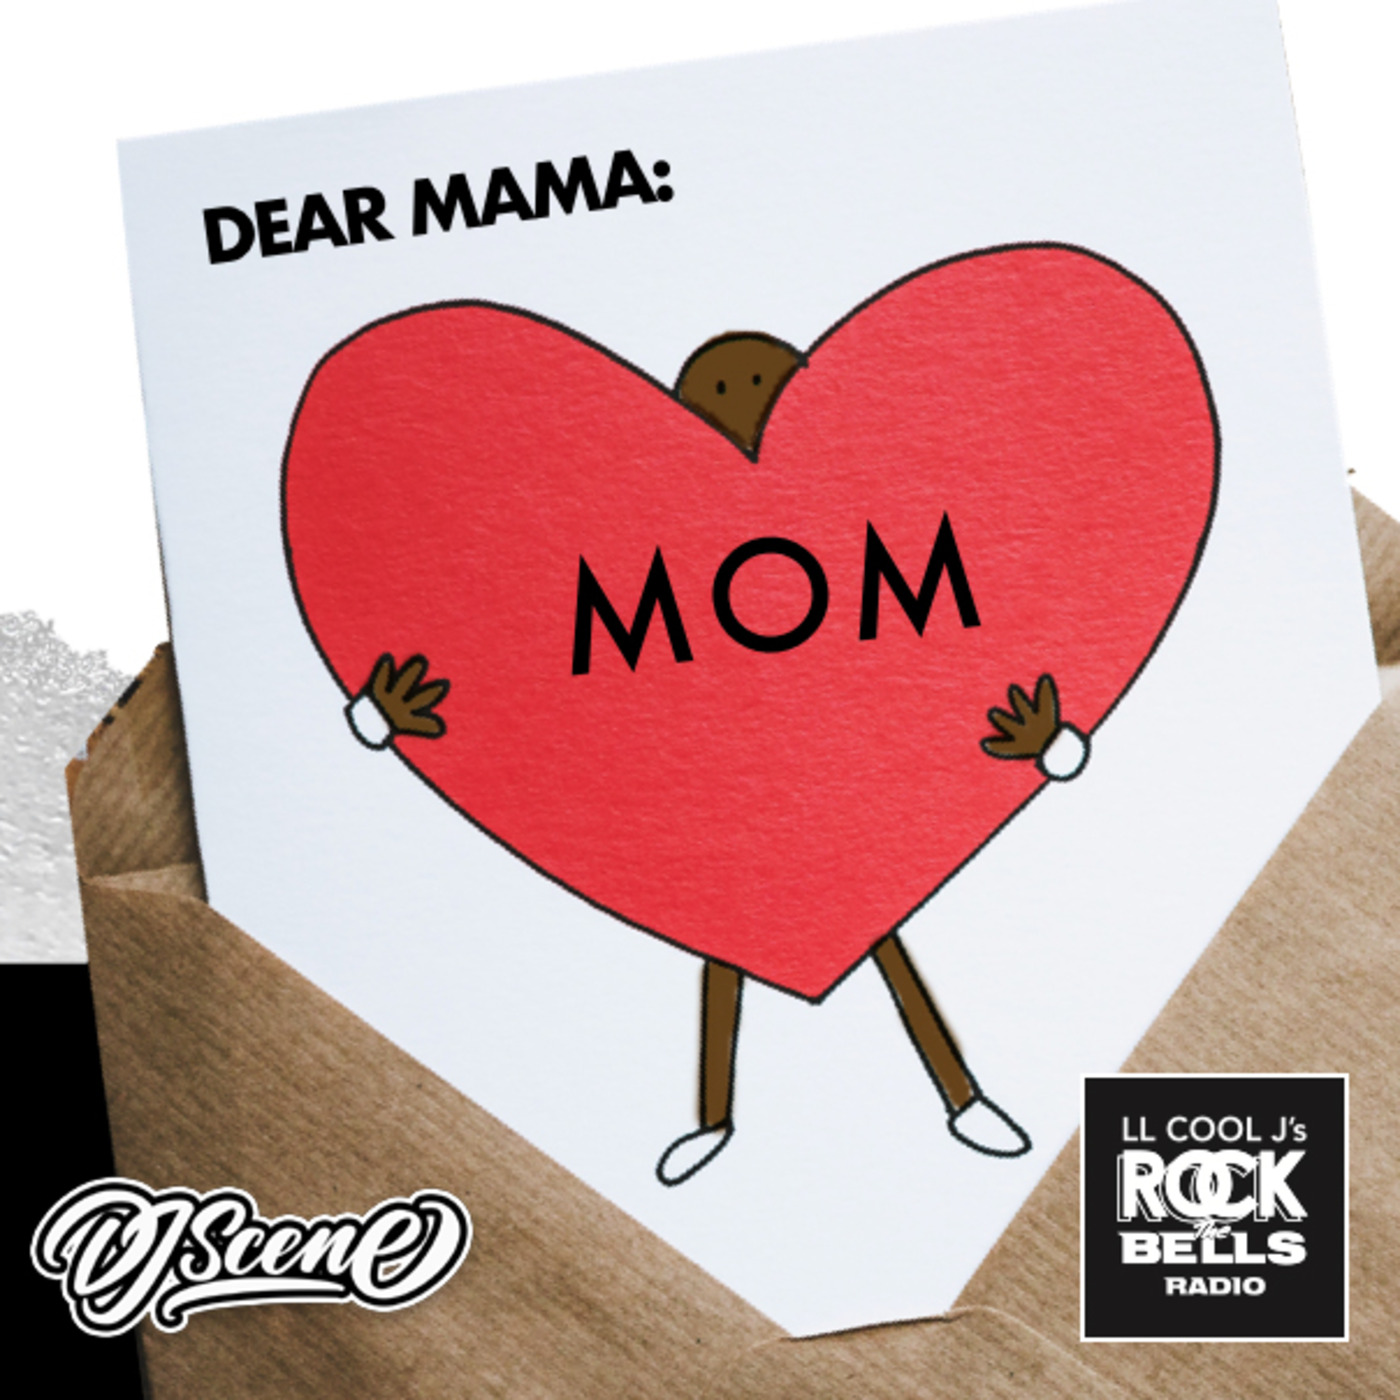 Episode 124: Rock The Bells Radio - Mothers Day Mix